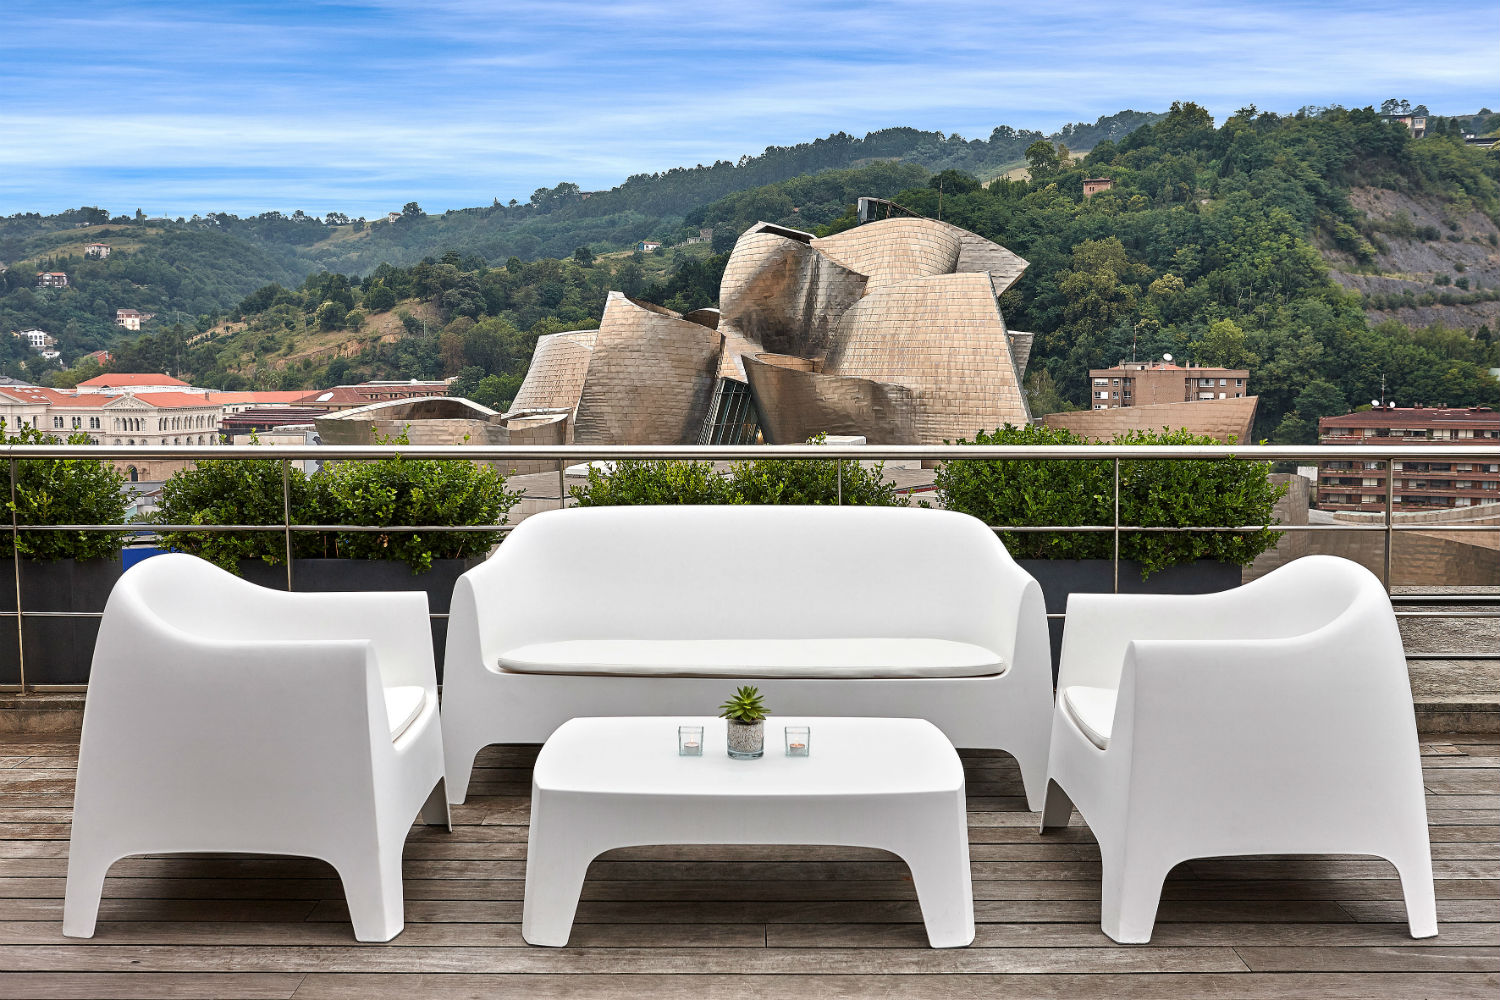 Terrace Lounging with view of Guggenheim